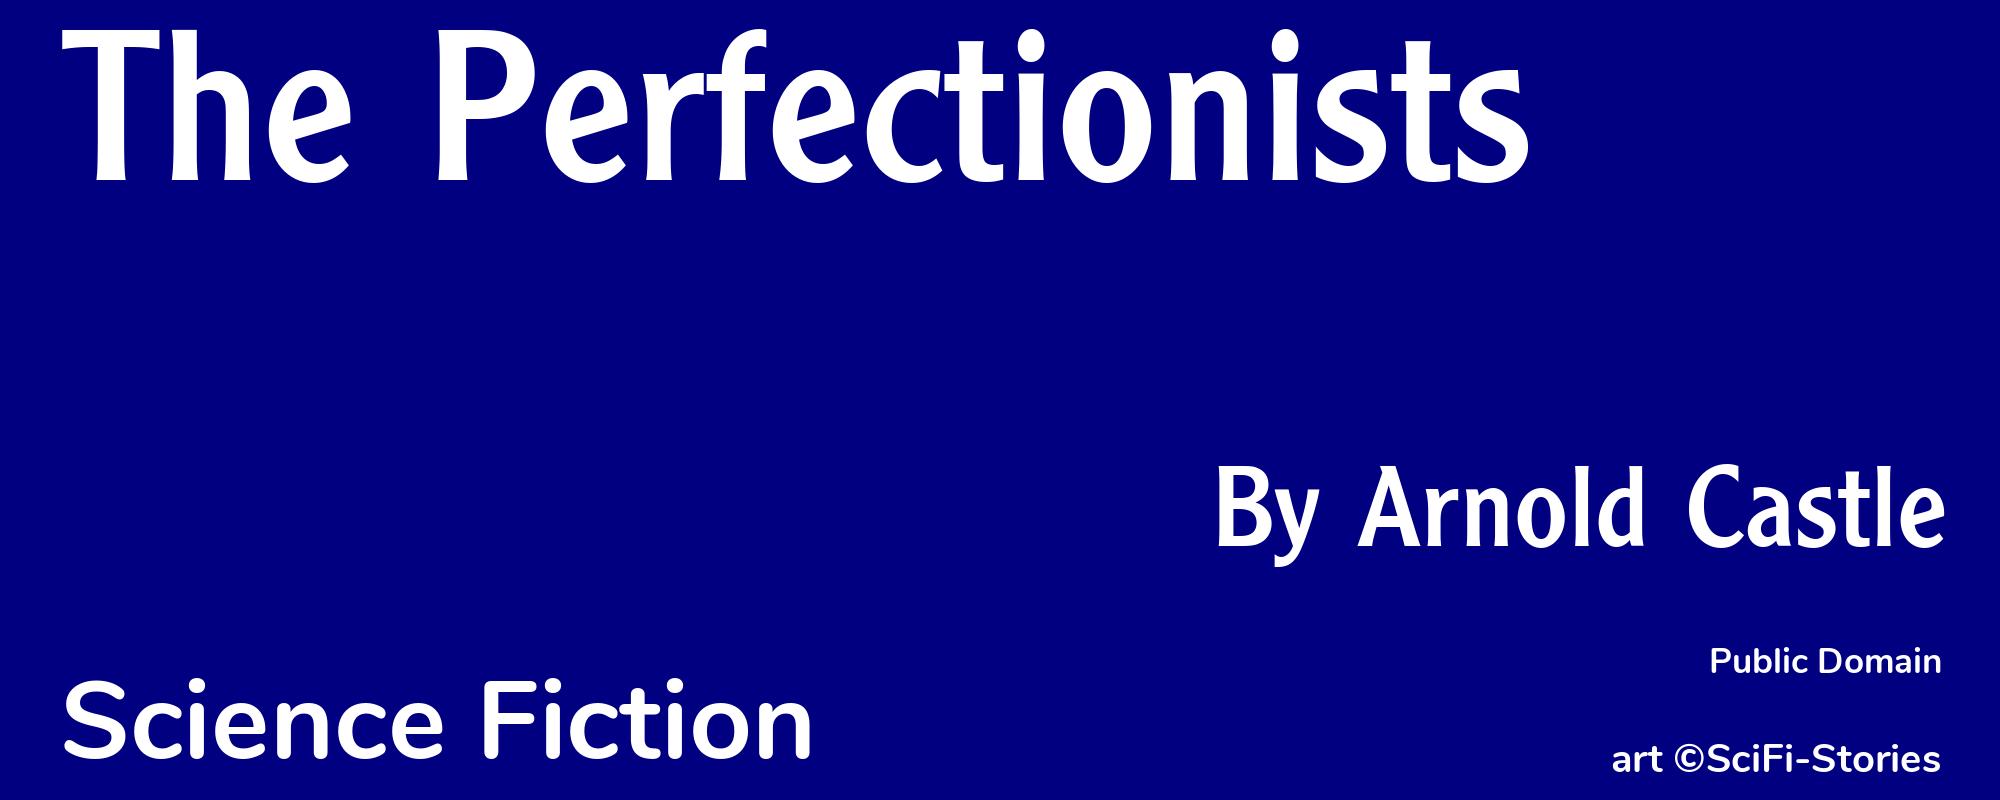 The Perfectionists - Cover